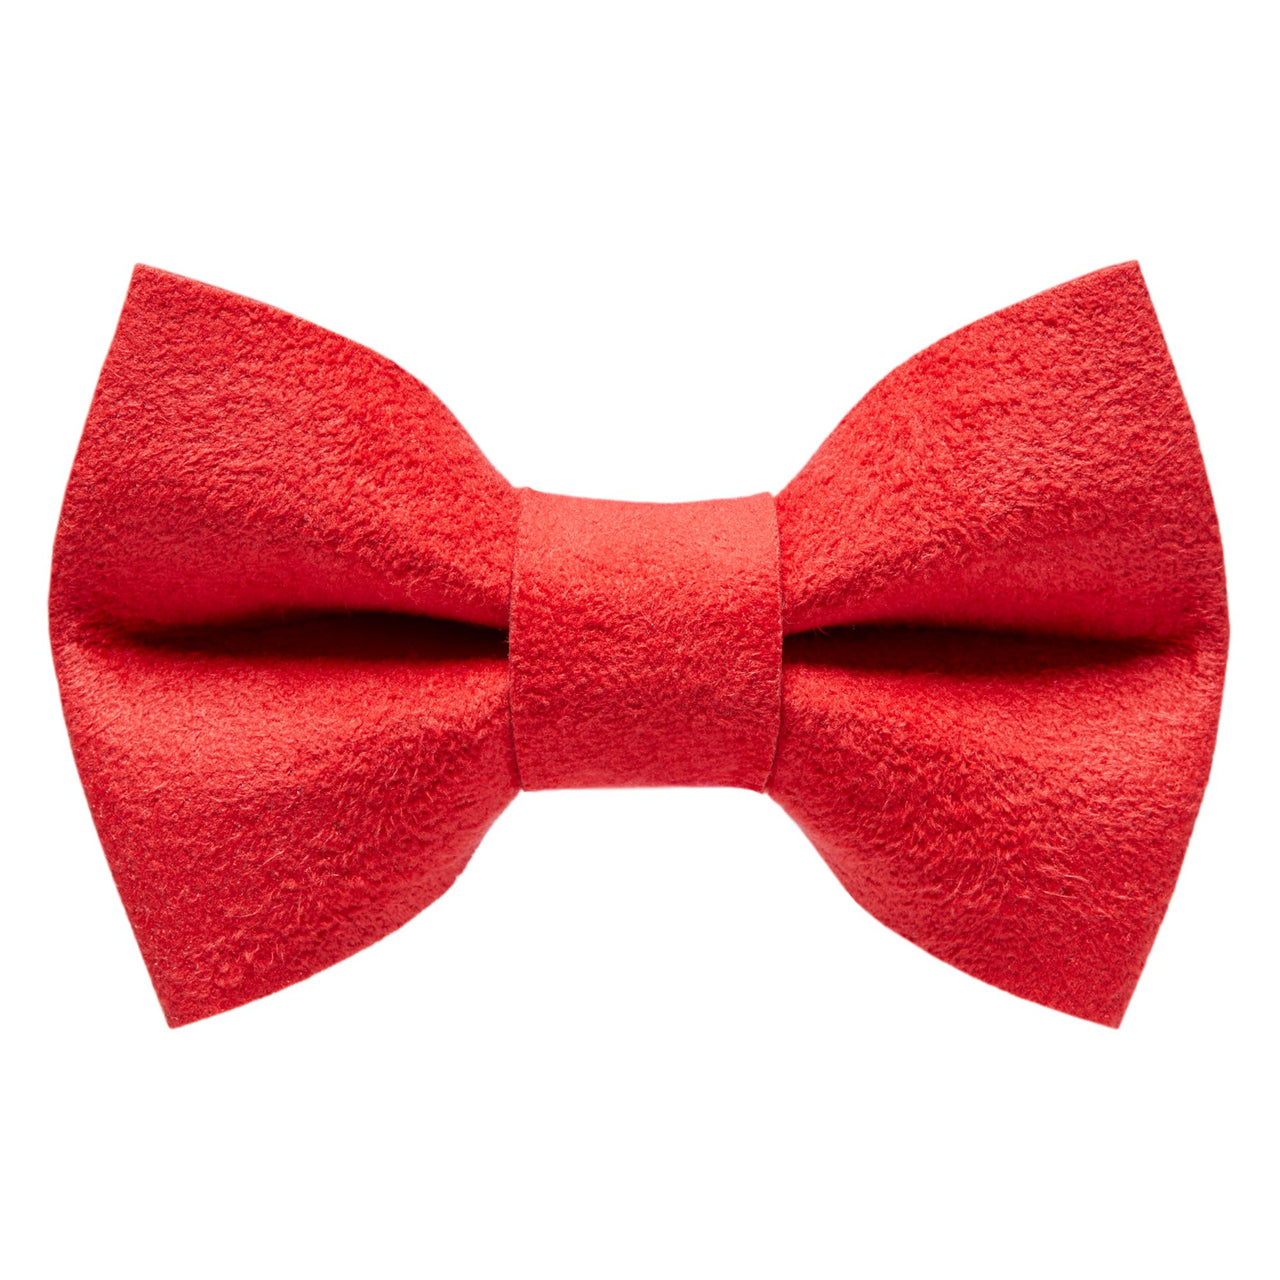 The Luxe - Red Ultrasuede - Cat / Dog Bow Tie